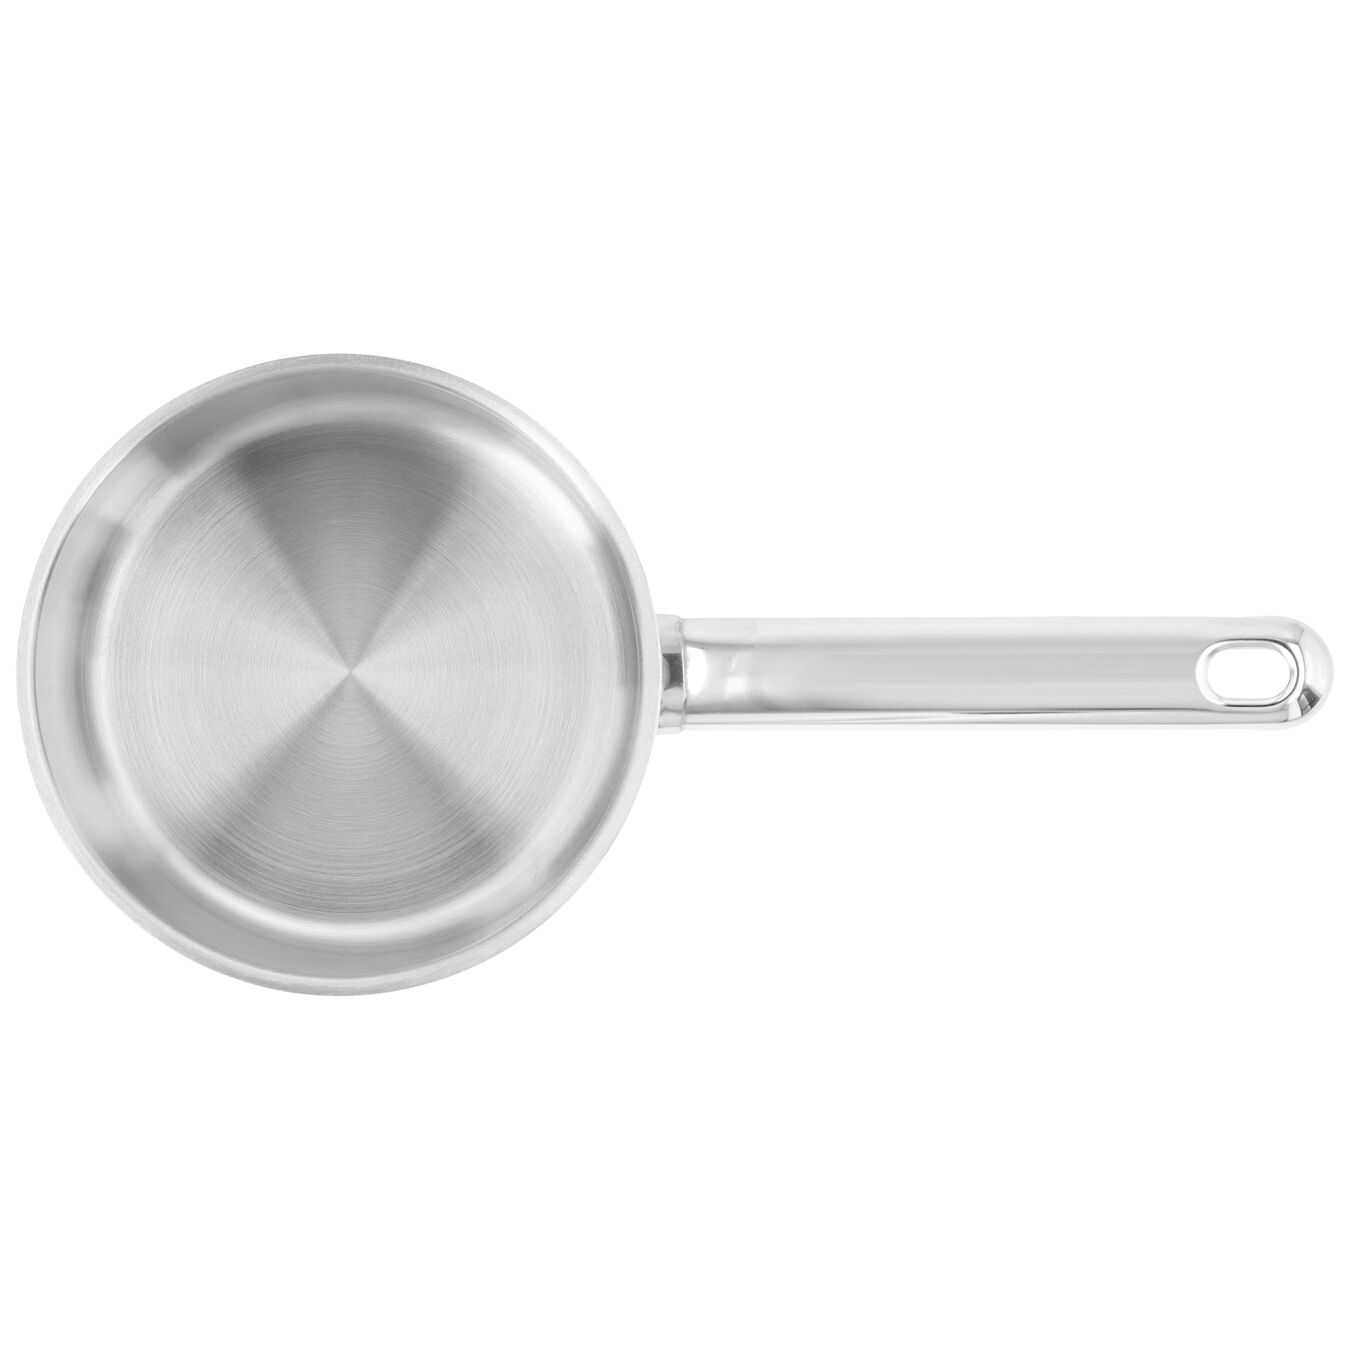 14 cm 18/10 Stainless Steel Saucepan without lid silver,,large 2